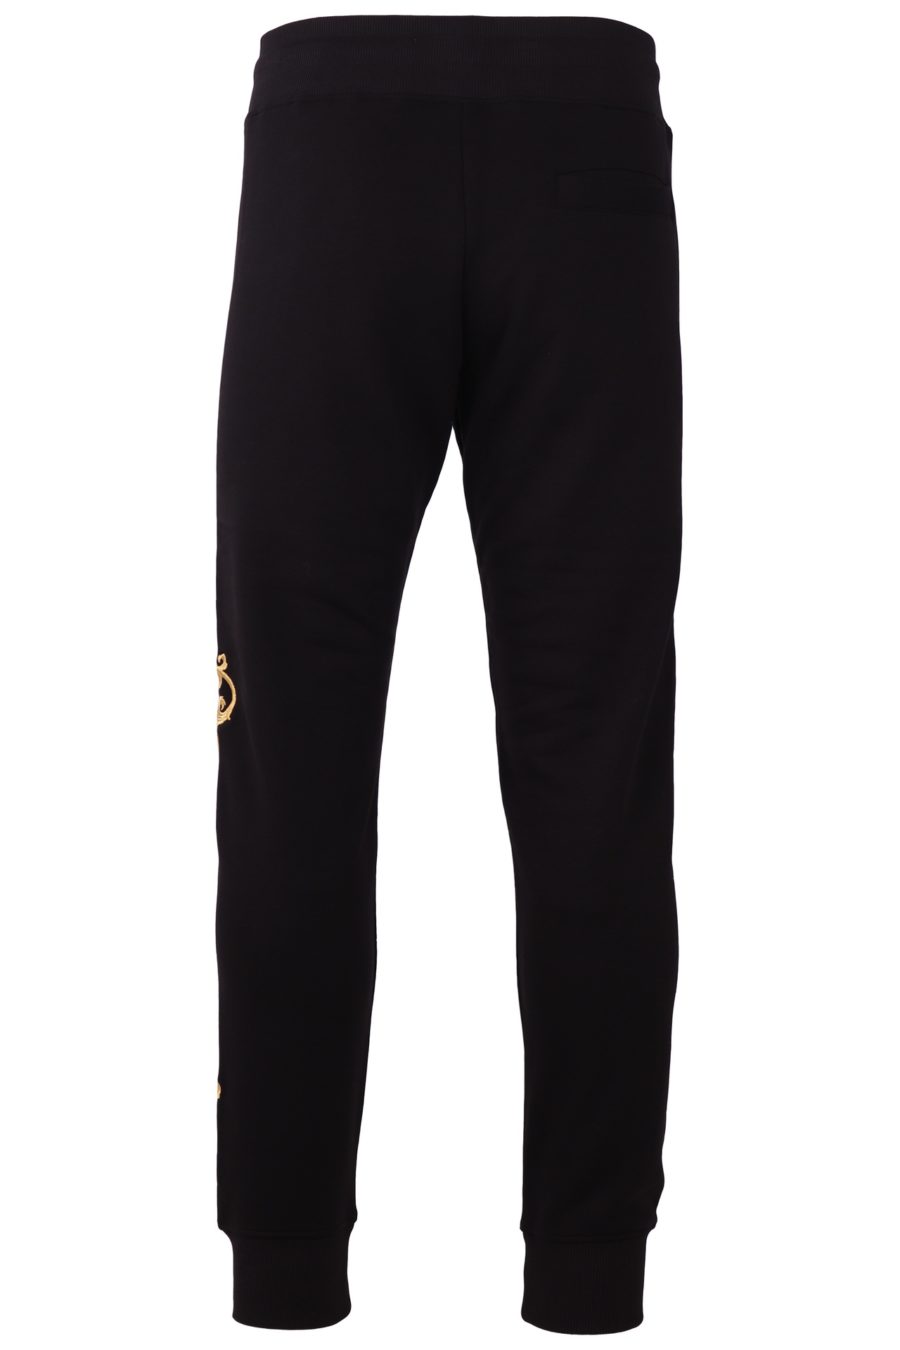 Tracksuit bottoms Versace Jeans Couture black with embroidered logo - 596c544b6bee74d1ad85dbeaf1766fa75b4c909b